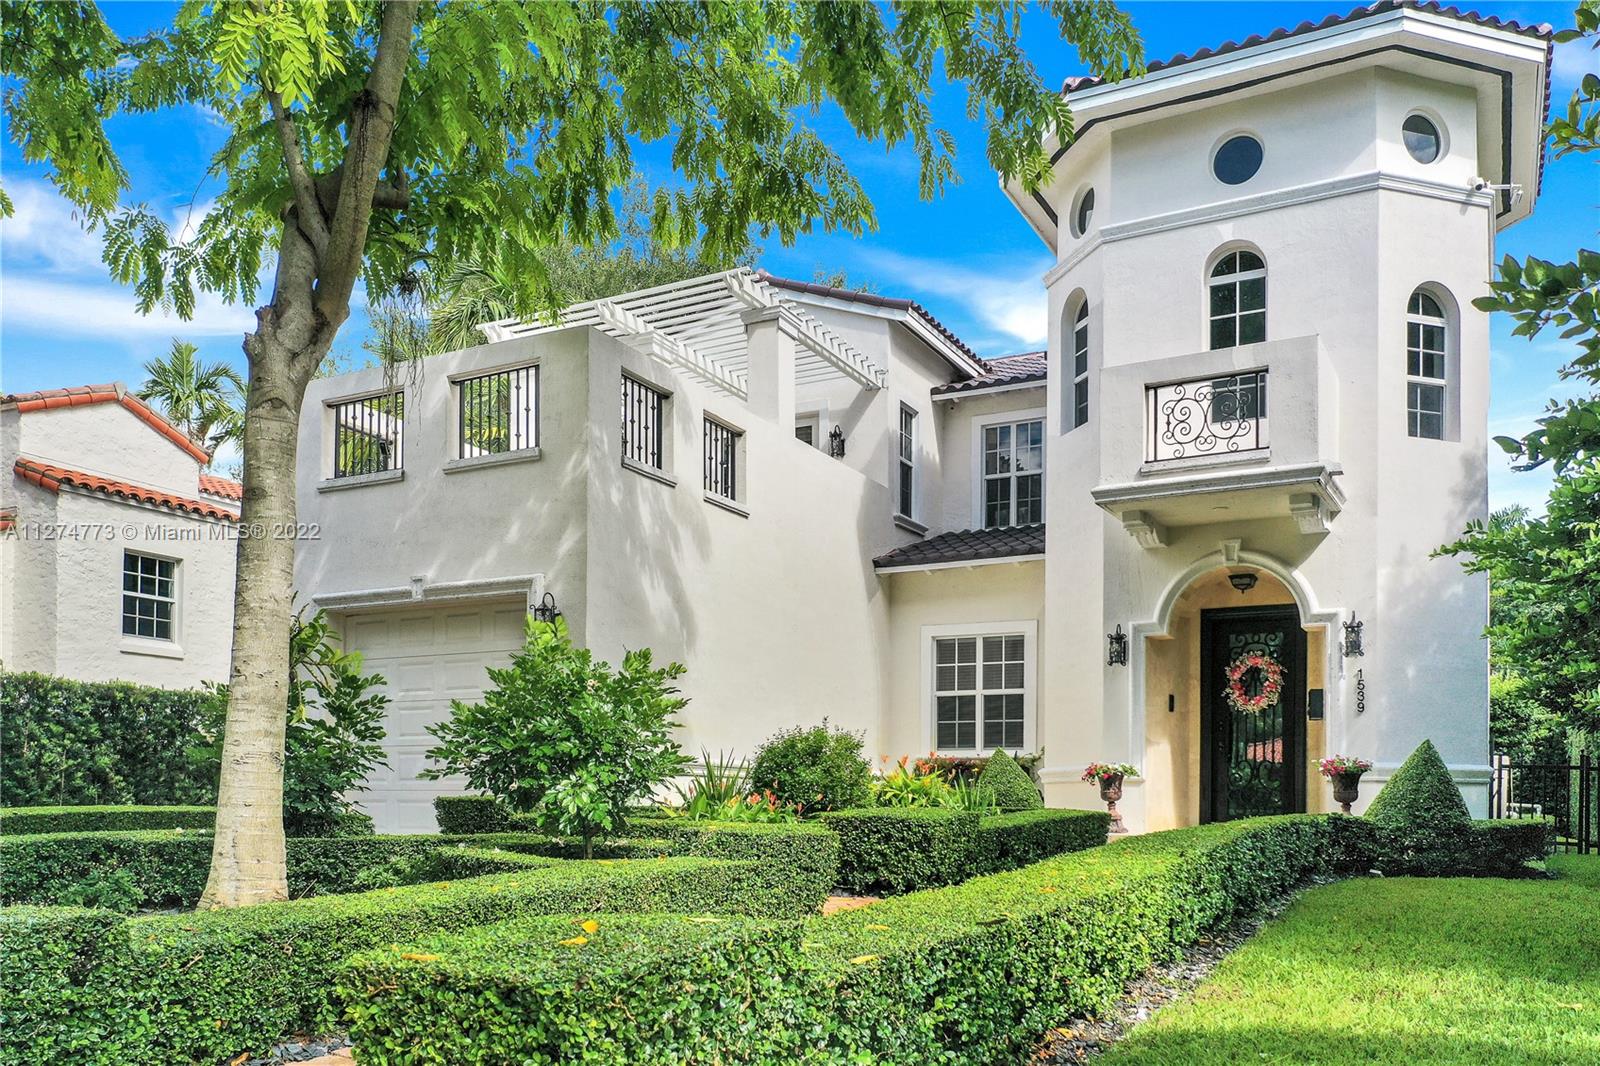 Coral Gables Gem! 4 Bd/3 Ba Home, 4th bedroom converted to den. Offers a Mediterranean Design w/multiple terraces/balconies, showcasing City views. Prime Gables Location, minutes from Historical sites, venues, restaurants, & shops. Newer Built home was Upgraded in 2019 w/high-grade finishes throughout. Italian Design MIACUCINA kitchen w/oversized island, Quartz Waterfall Countertop, Built-In Appliances (Double SubZero Fridge(s) & Wine Fridge), Wolf Range (gas), & Asko Dishwasher. All Hurricane Impact Windows/Doors & New 2022 Roof w/10yr Transferable Warranty. Marble Floors throughout w/newly Remodeled Baths. Open FloorPlan w/extended lanai, exterior travertine flooring & pool for entertaining. Professionally Landscaped- Immaculate Home shows like a Model & includes partial furnishings.